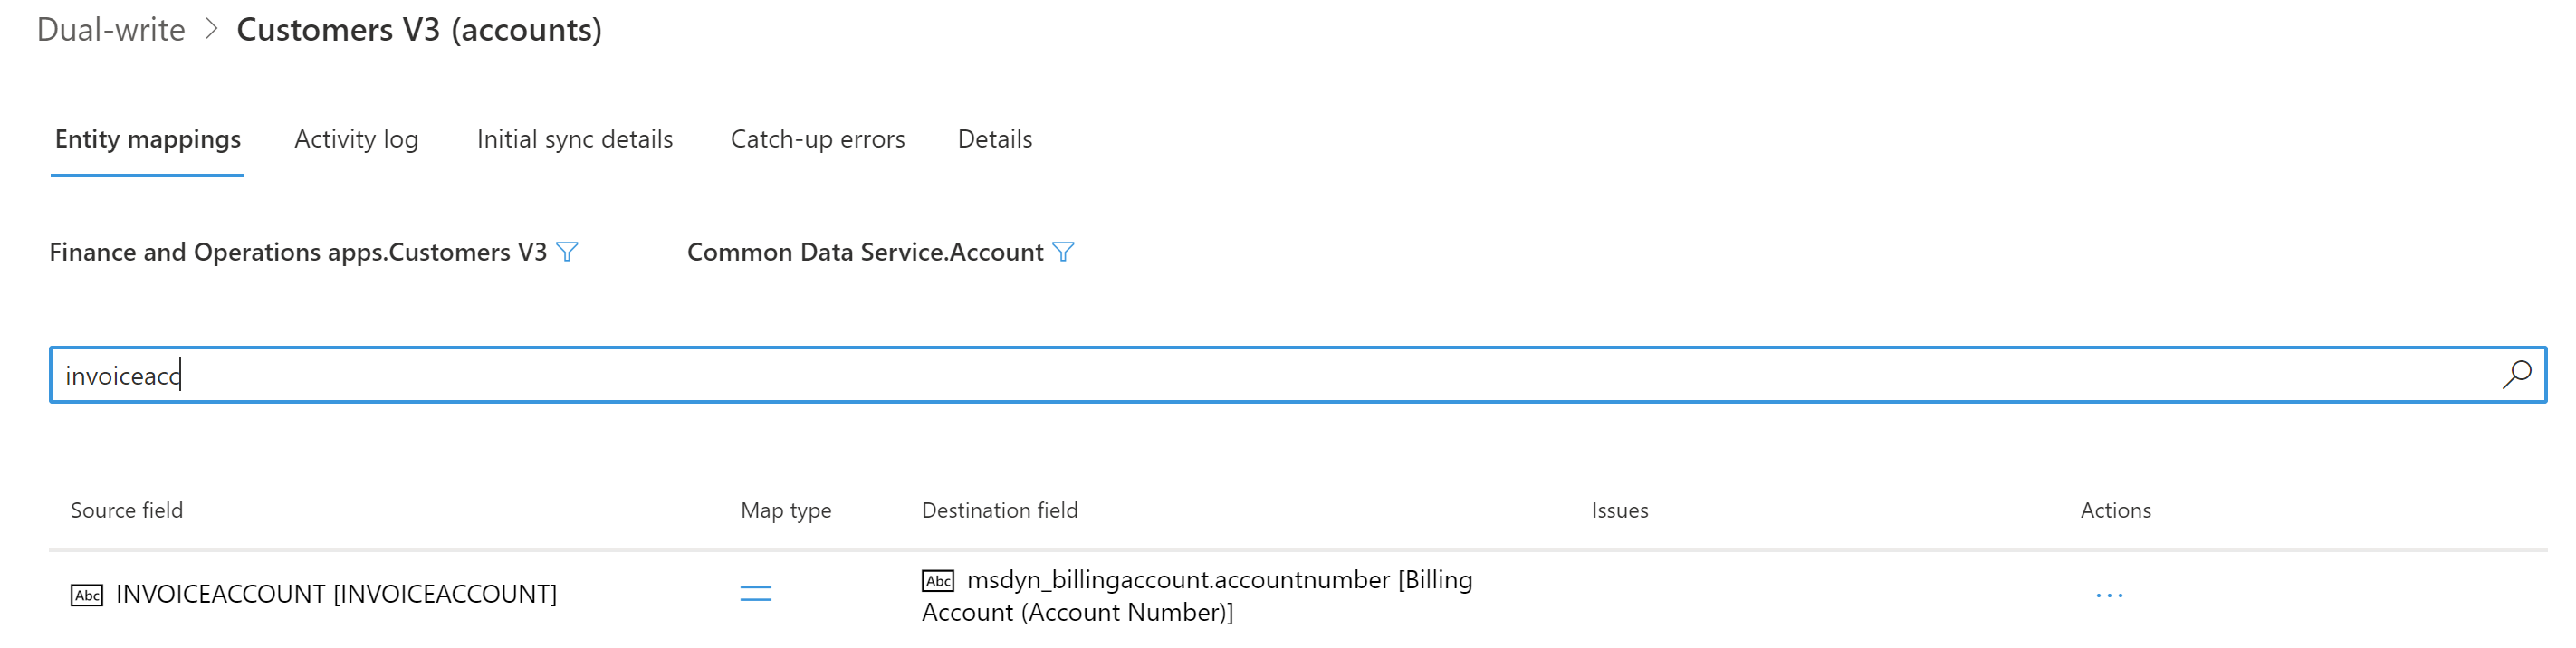 Deleting the InvoiceAccount column.